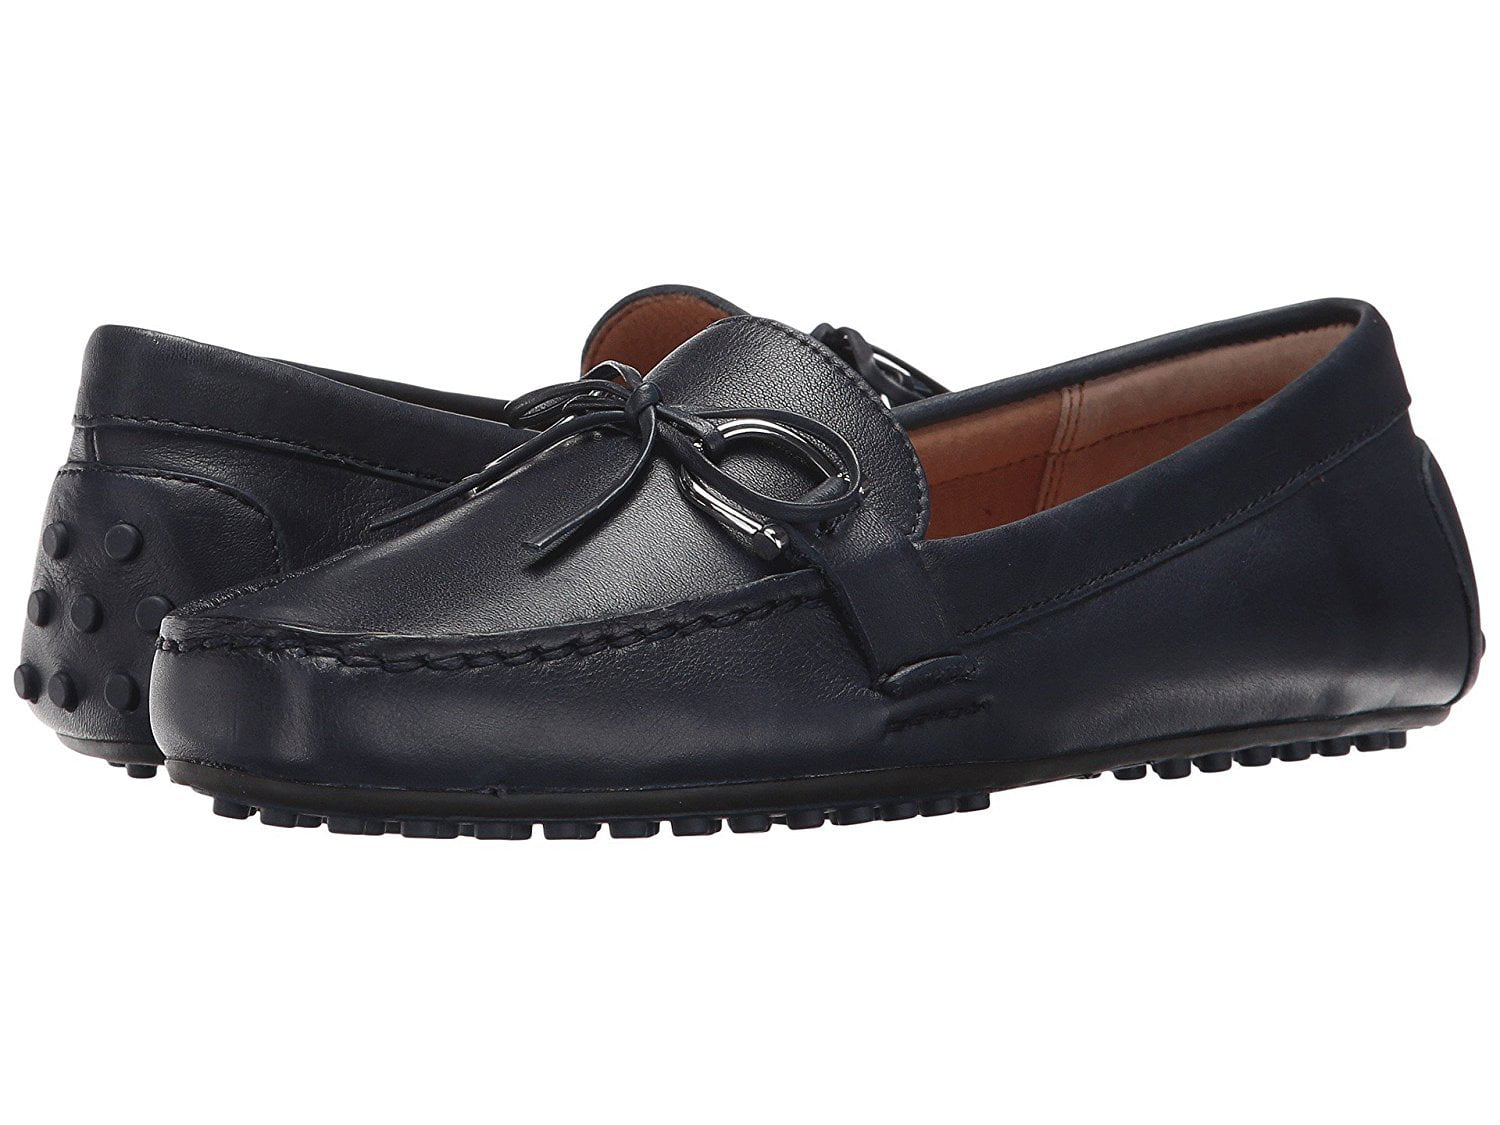 briley leather loafer